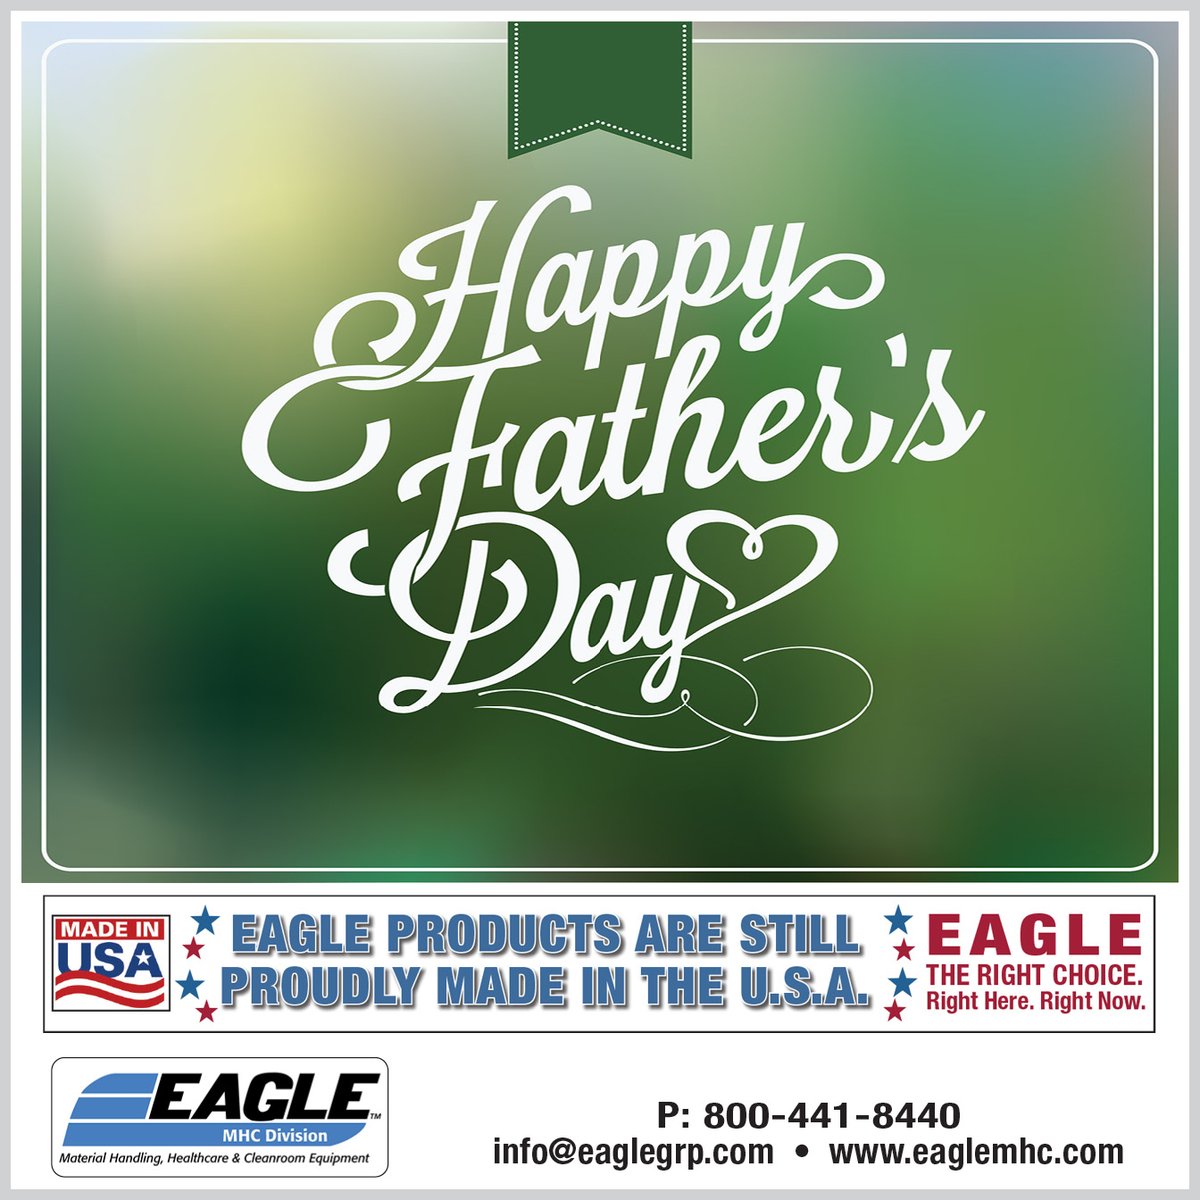 This weekend we celebrate dads.  New dads, experienced dads, step-dads, single dads, grand-dads and dads who are no longer with us.

Happy Father’s Day.

#healthcaresolutions #laboratorysolutions #healthcareequipment 
#stainlesssteelcasework #madeintheusa #fathersday